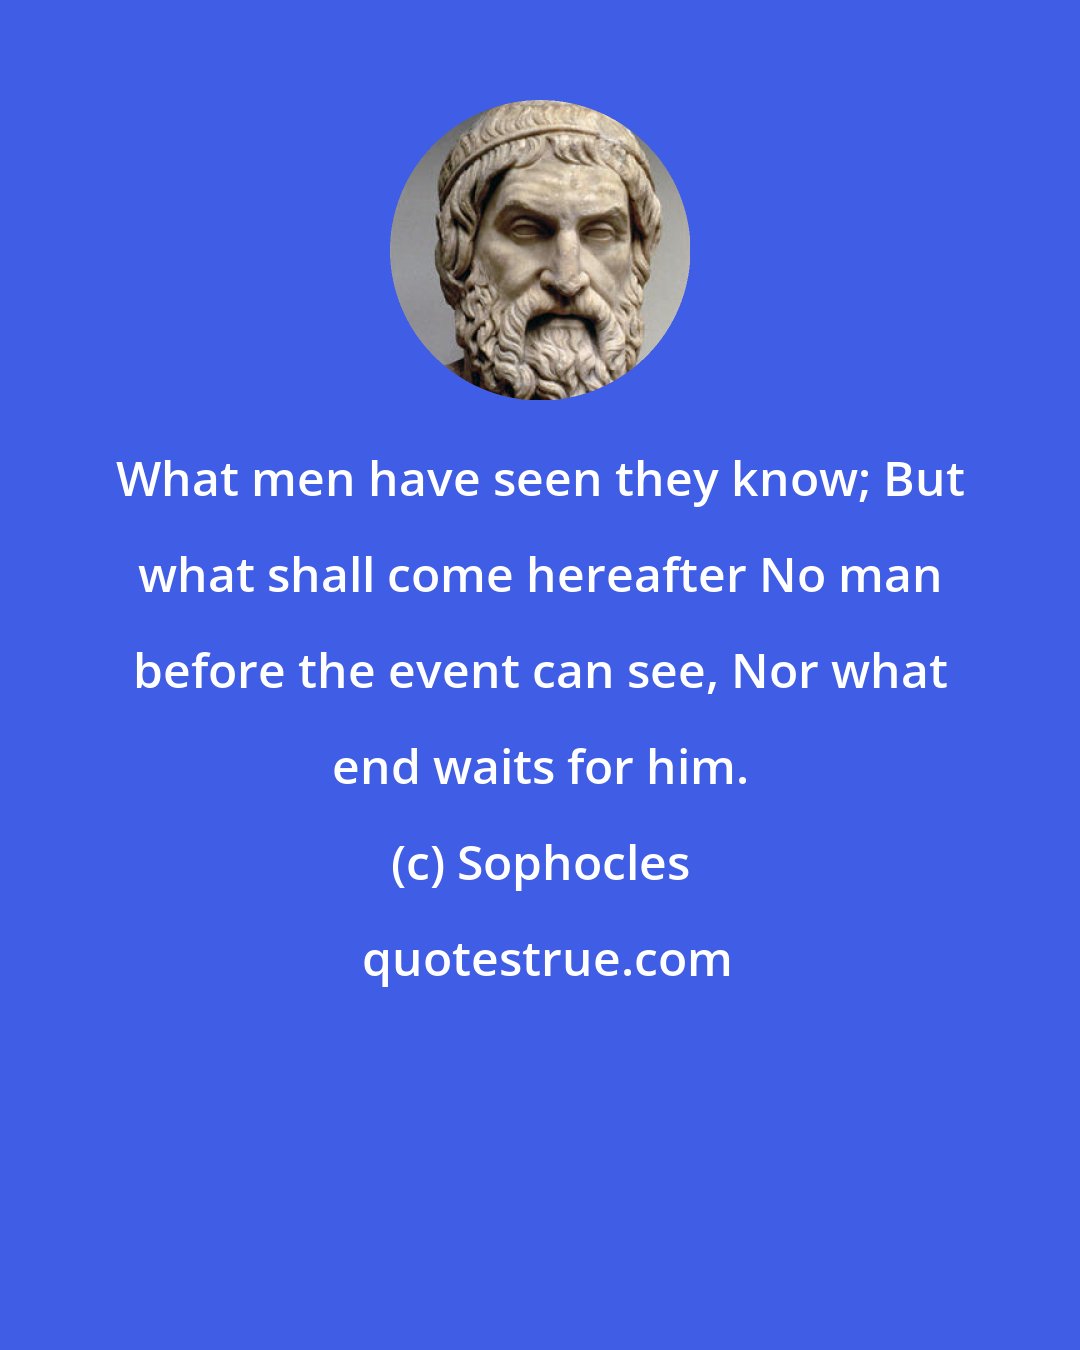 Sophocles: What men have seen they know; But what shall come hereafter No man before the event can see, Nor what end waits for him.